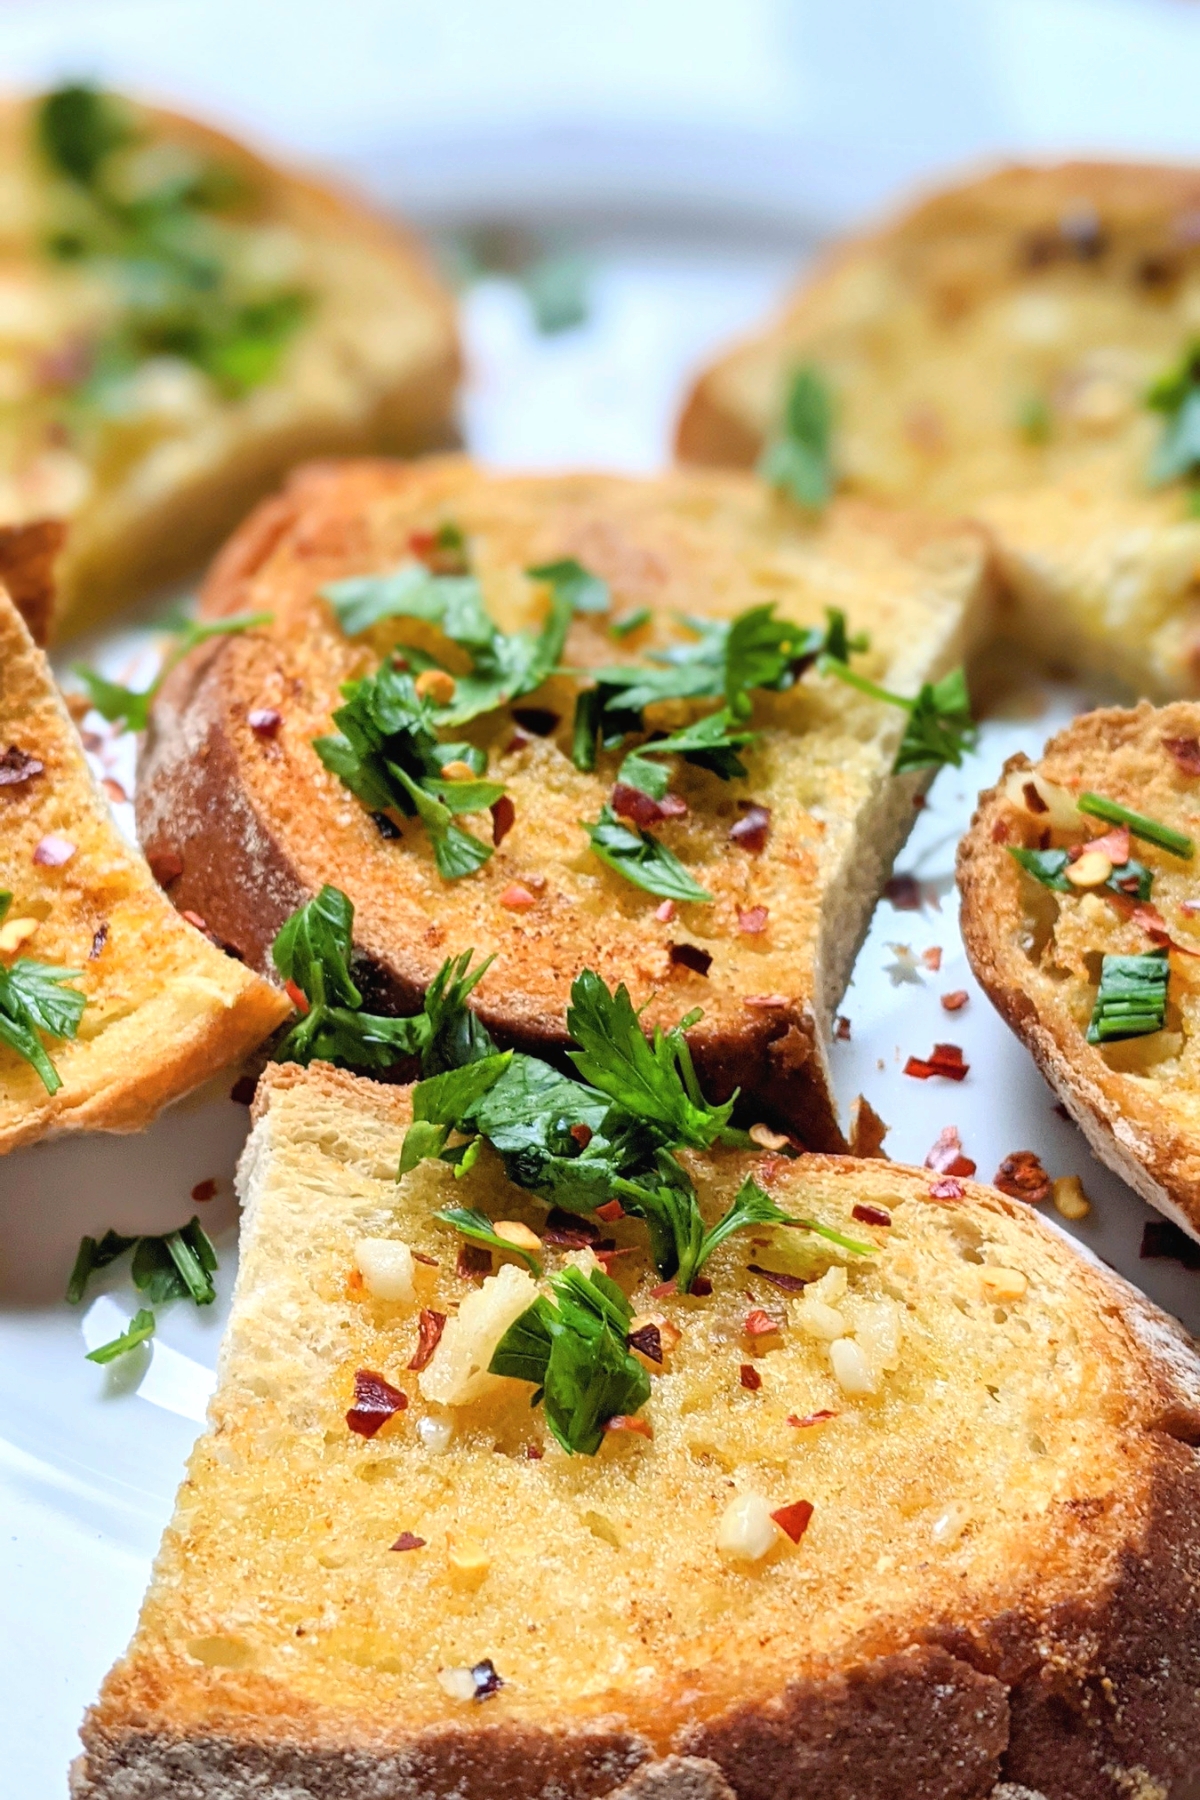 low sodium side dishes healthy garlic bread with no salt fresh garlic and parsley on garlic bread with chili flakes on a plate